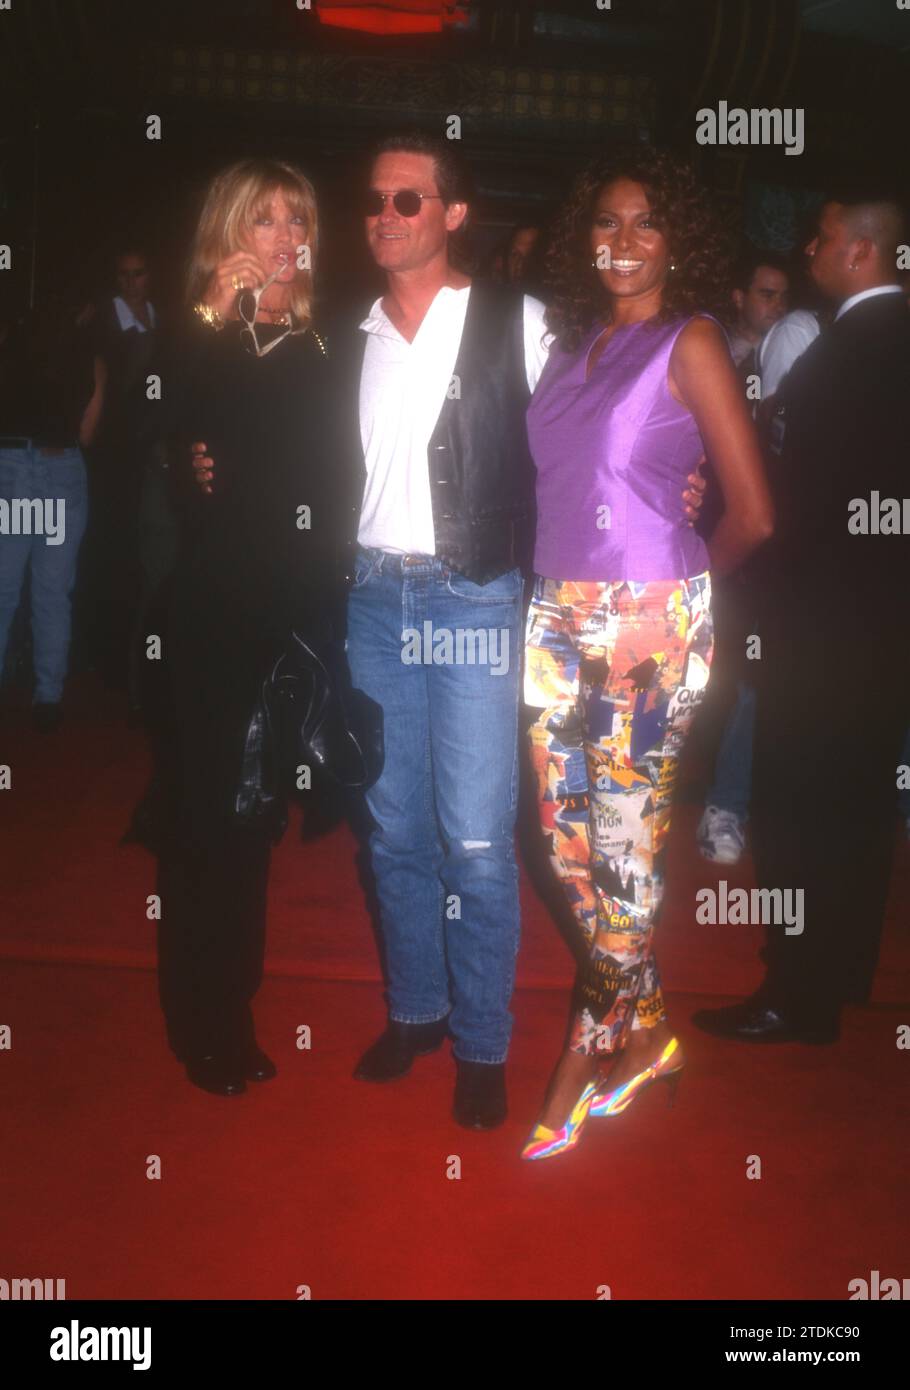 Los Angeles, California, USA 7th August 1996 Actress Goldie Hawn, Actor Kurt Russell and Actress Pam Grier attend Paramount Pictures Escape From LA Premiere at Mann Chinese Theatre on August 7, 1996 in Los Angeles, California, USA. Photo by Barry King/Alamy Stock Photo Stock Photo